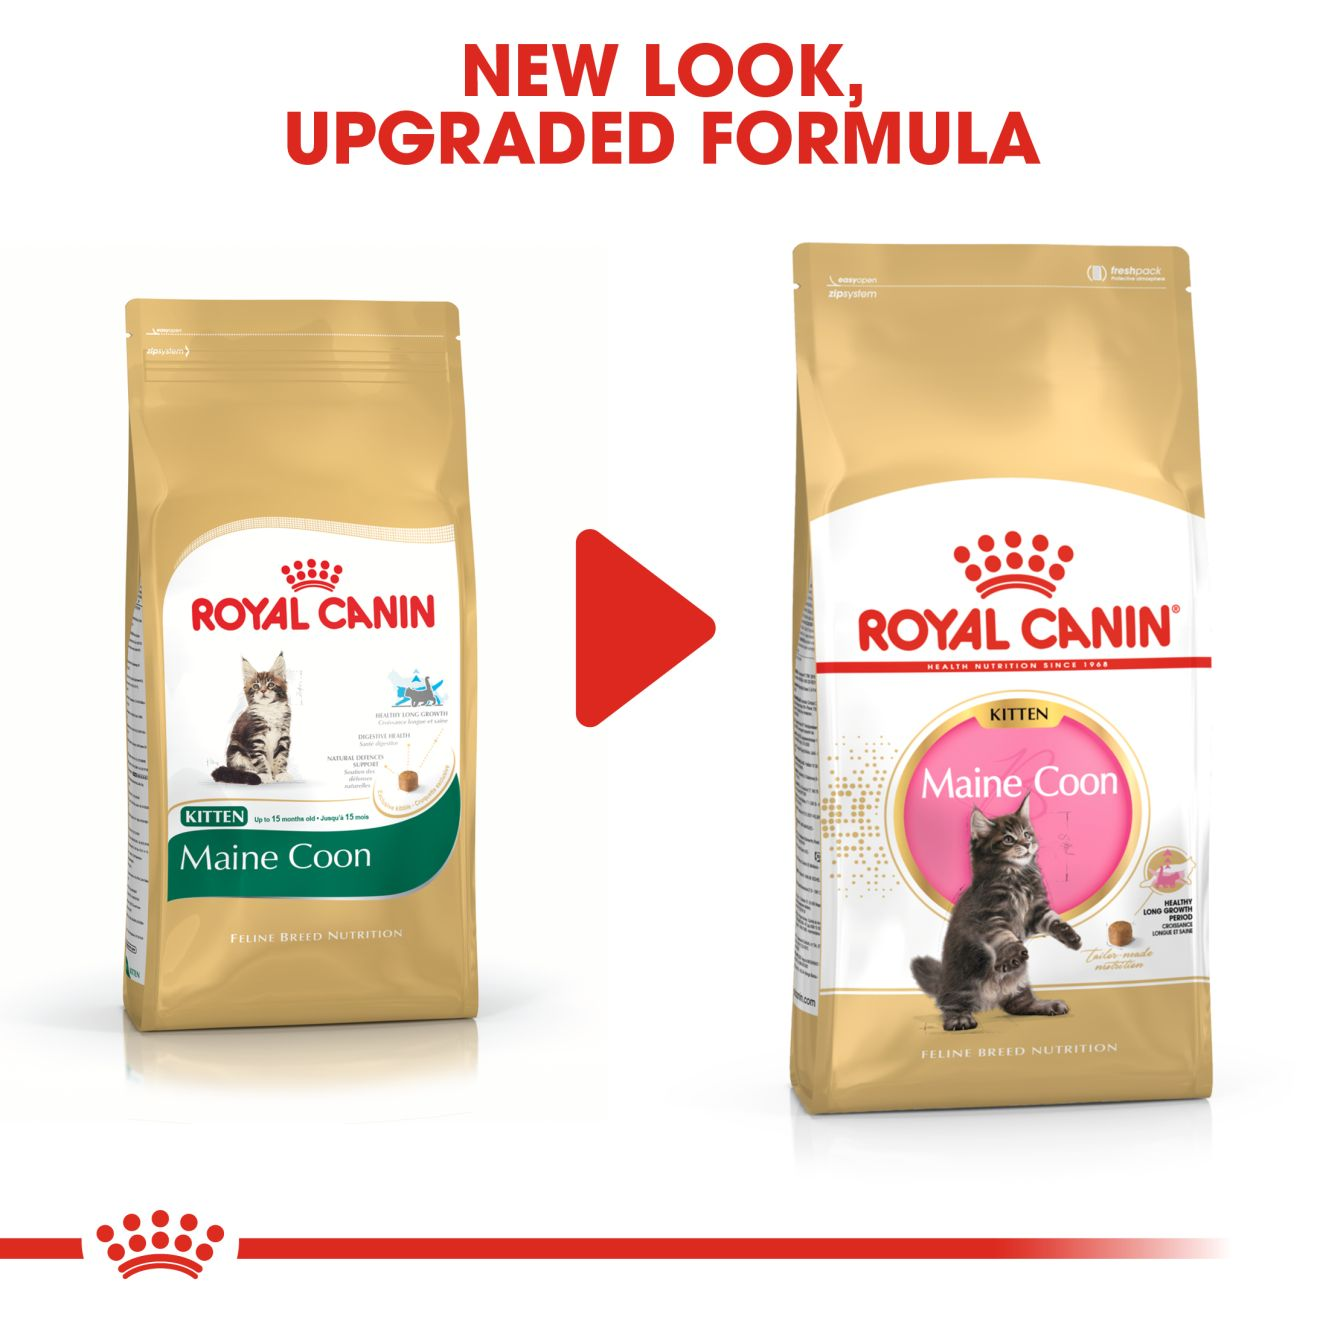 royal canin maine coon kitten wet food